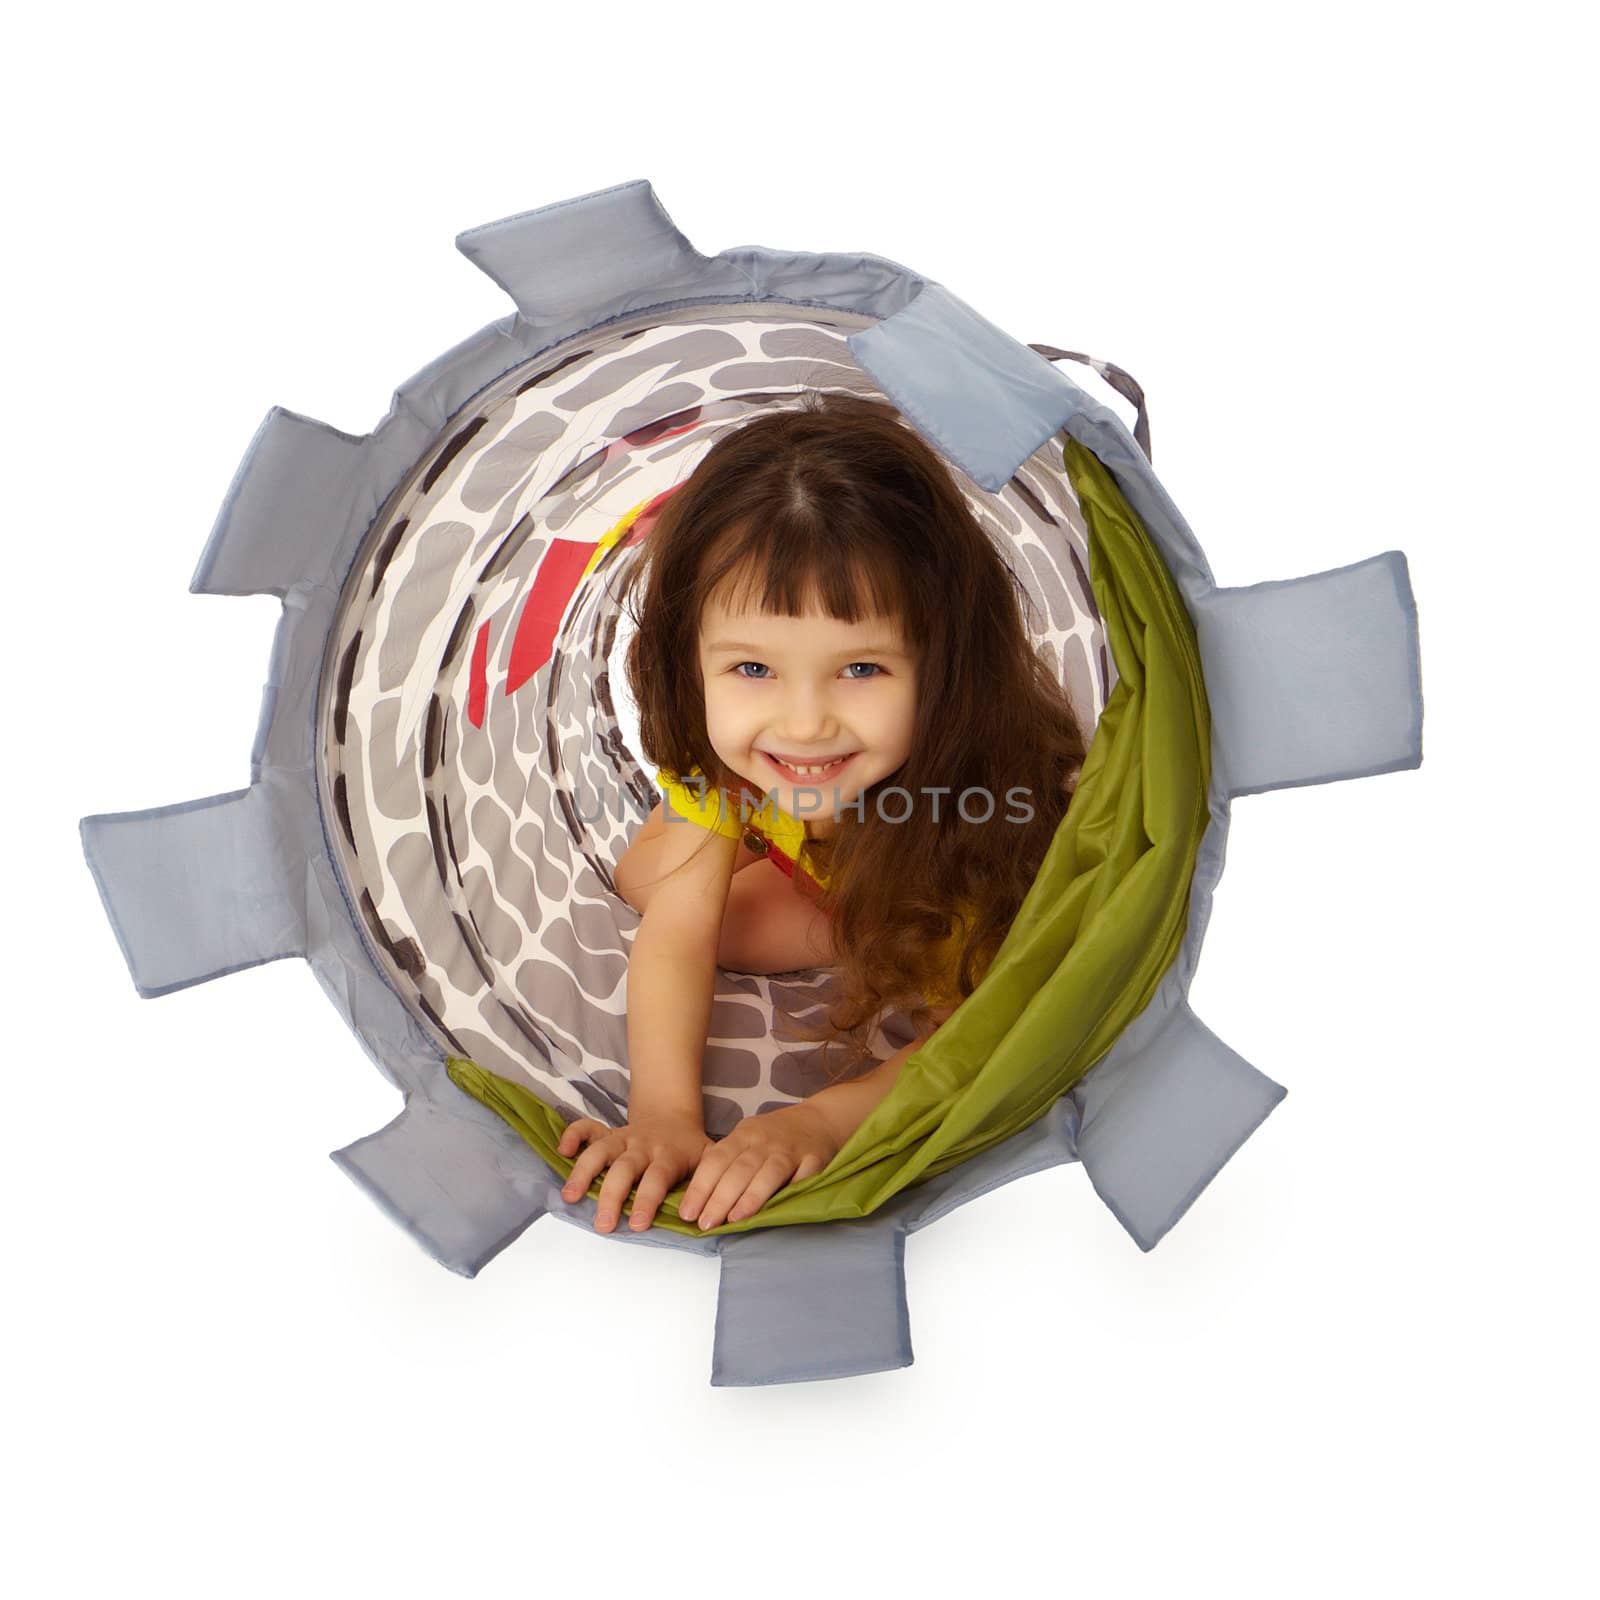 A little girl hiding inside the basket isolated on white background